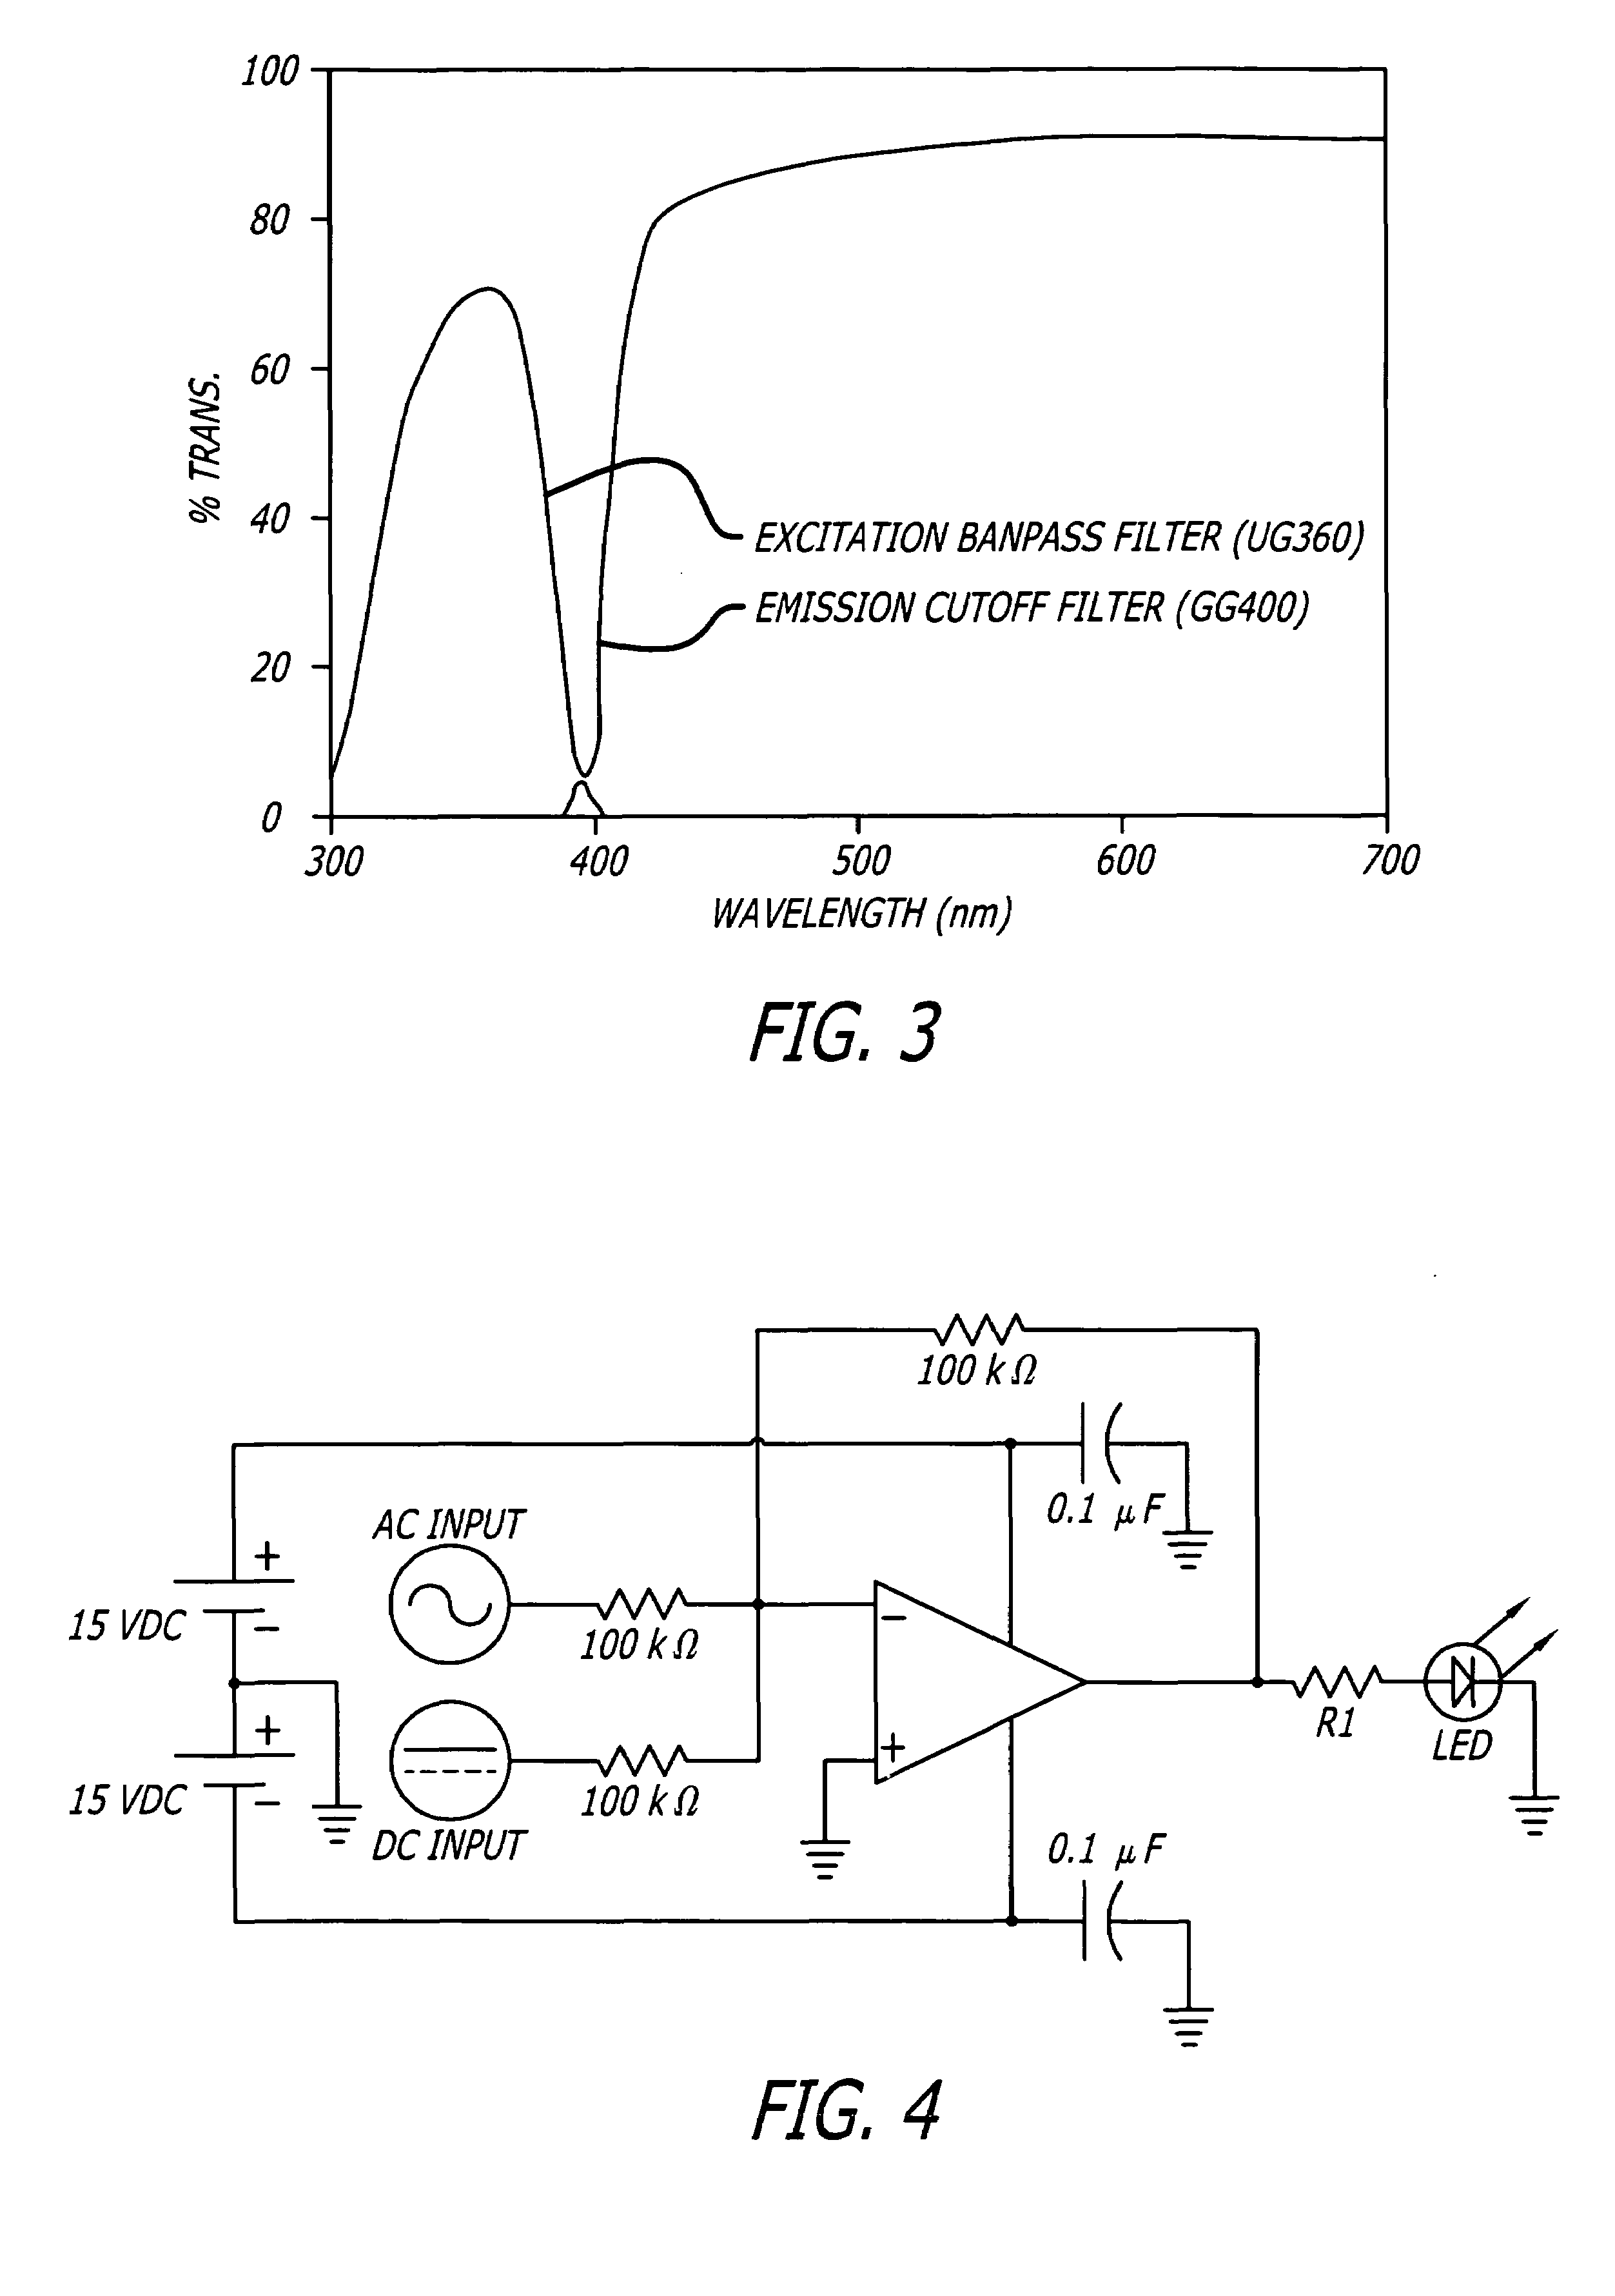 System and method for optical detection of petroleum and other products in an environment